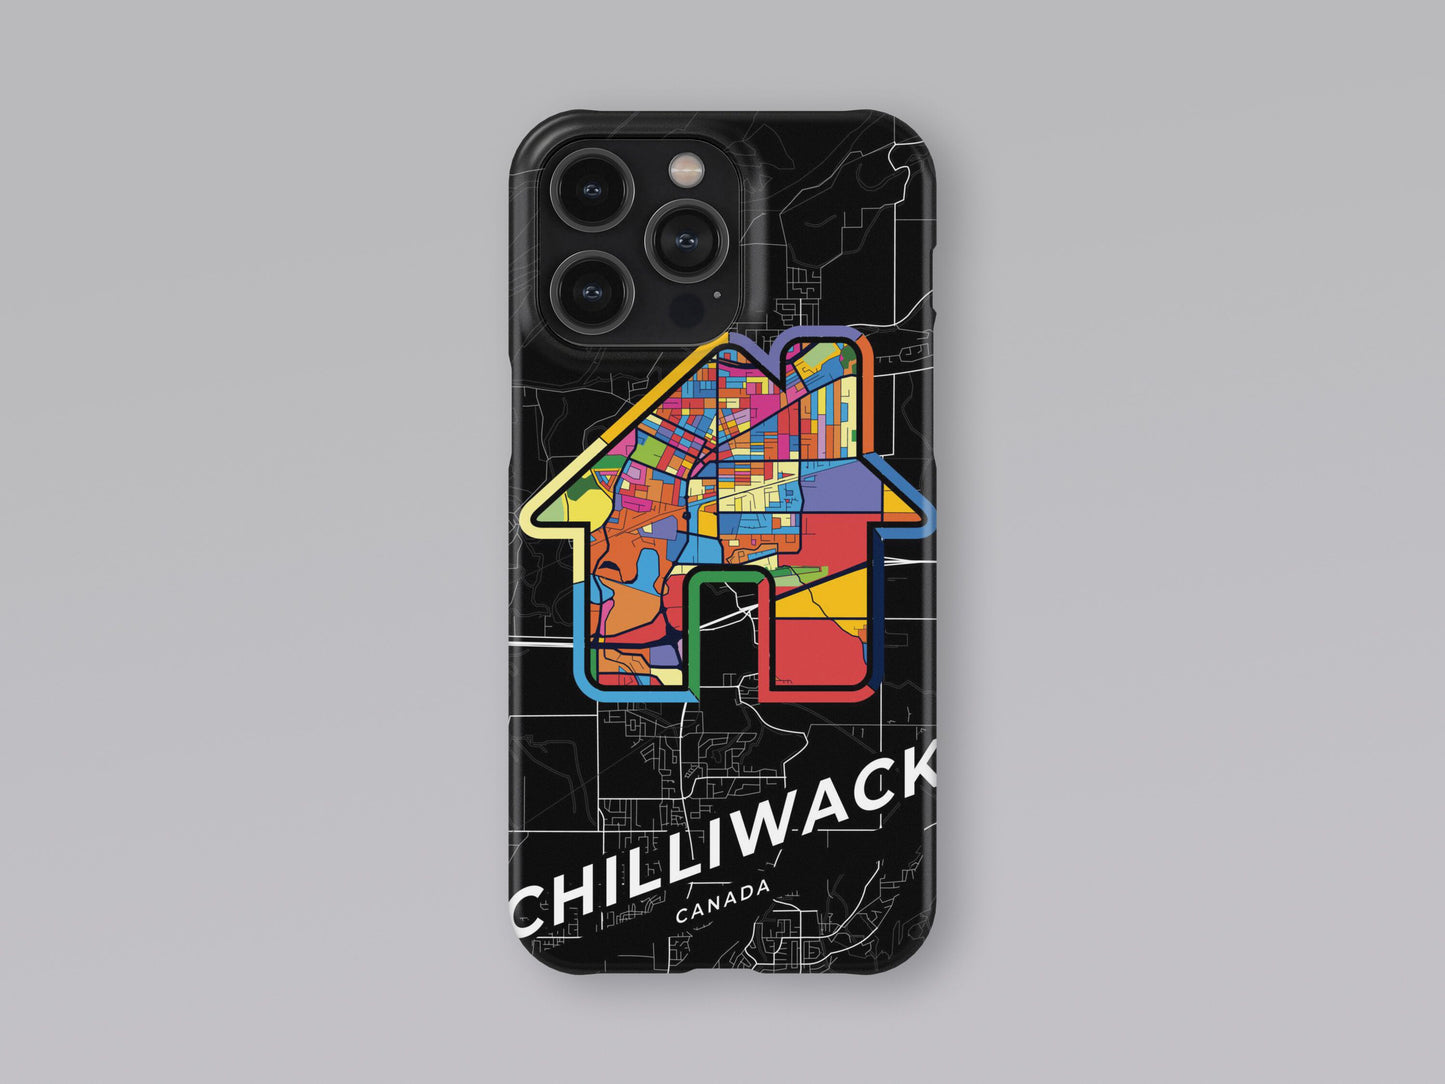 Chilliwack Canada slim phone case with colorful icon. Birthday, wedding or housewarming gift. Couple match cases. 3